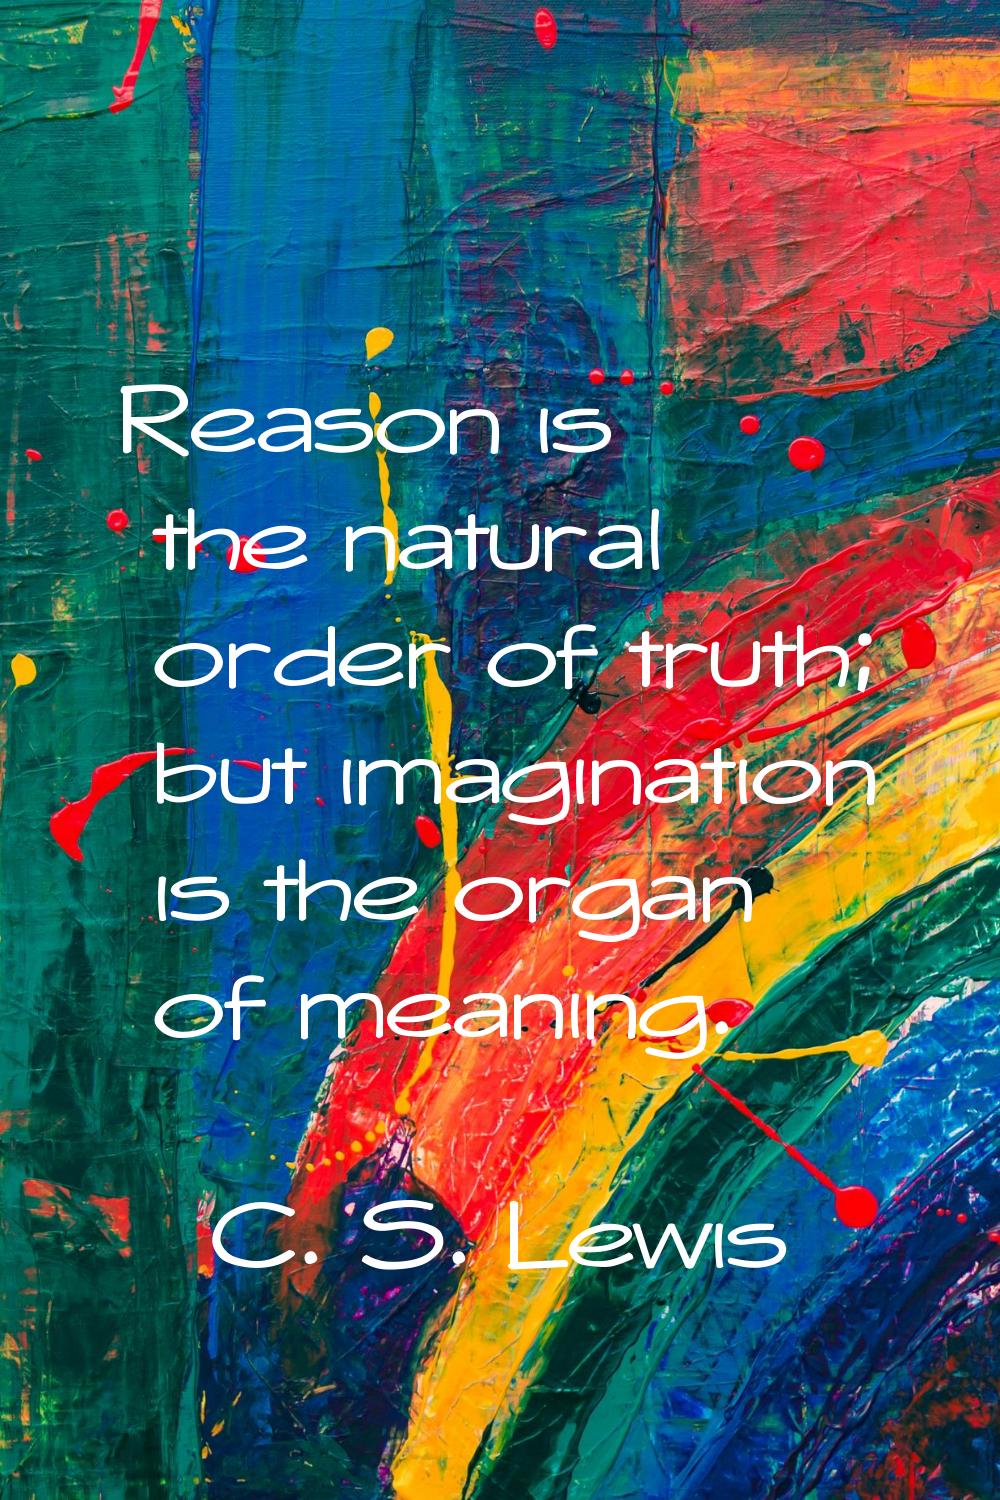 Reason is the natural order of truth; but imagination is the organ of meaning.